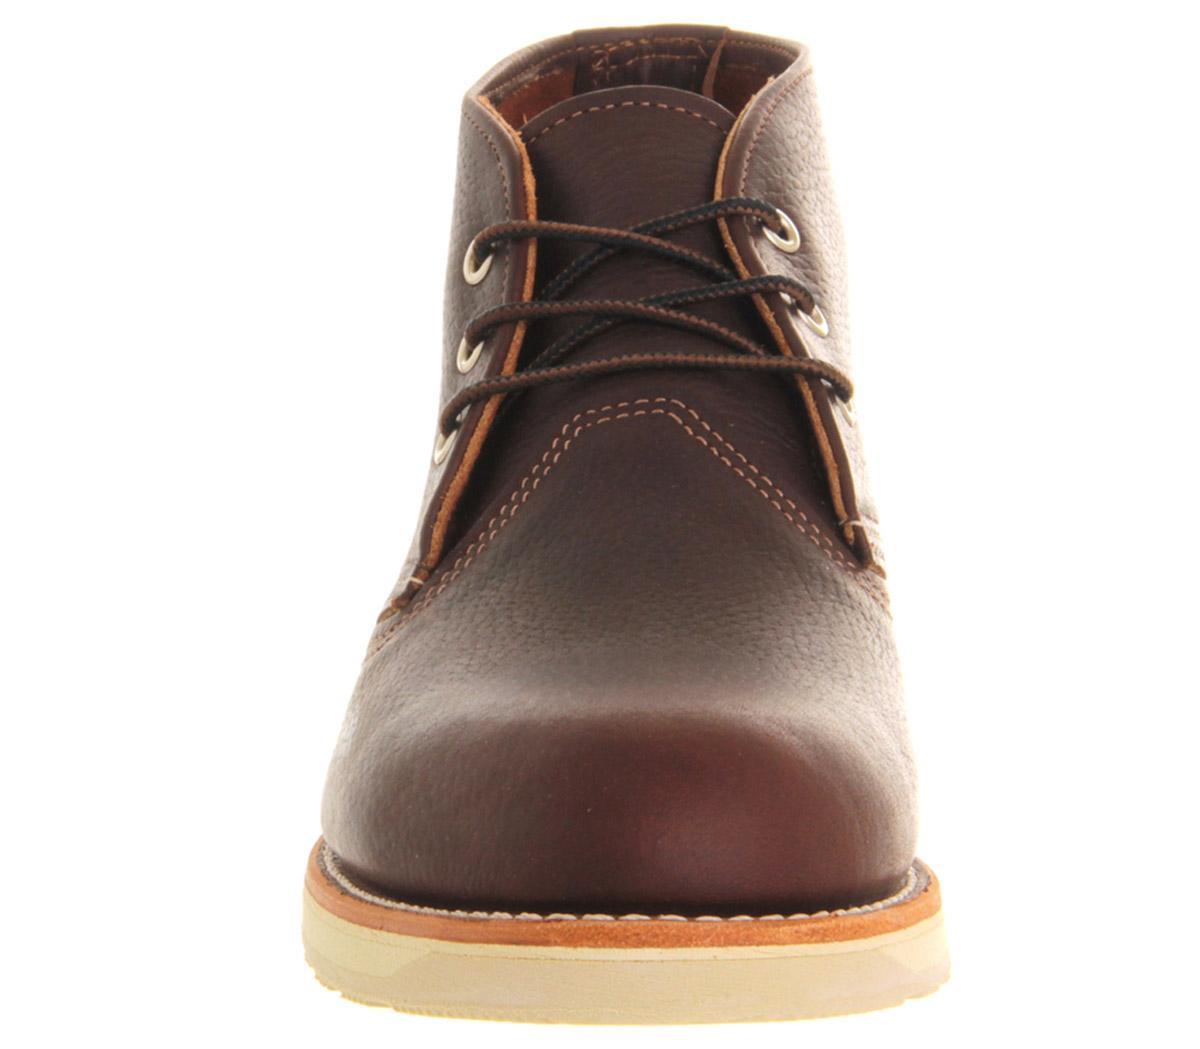 Redwing Work Chukka Boots Brown Leather - Boots